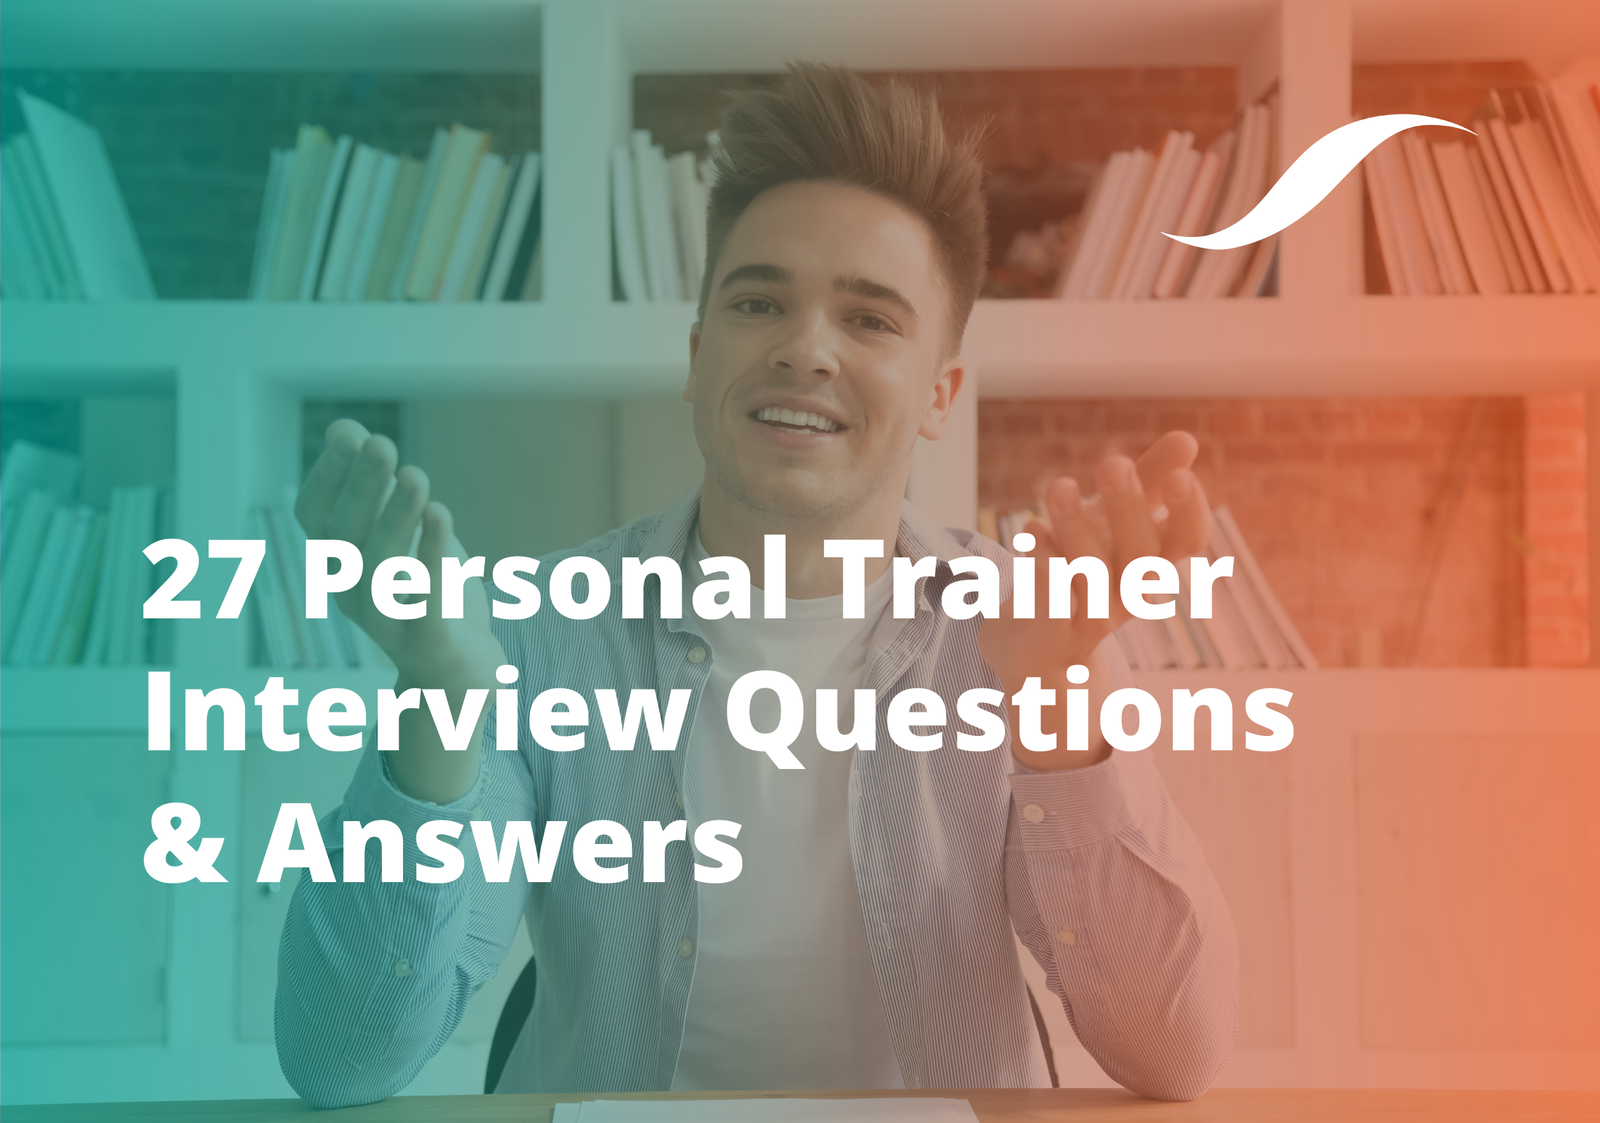 27 Personal Trainer Interview Questions and Answers OriGym